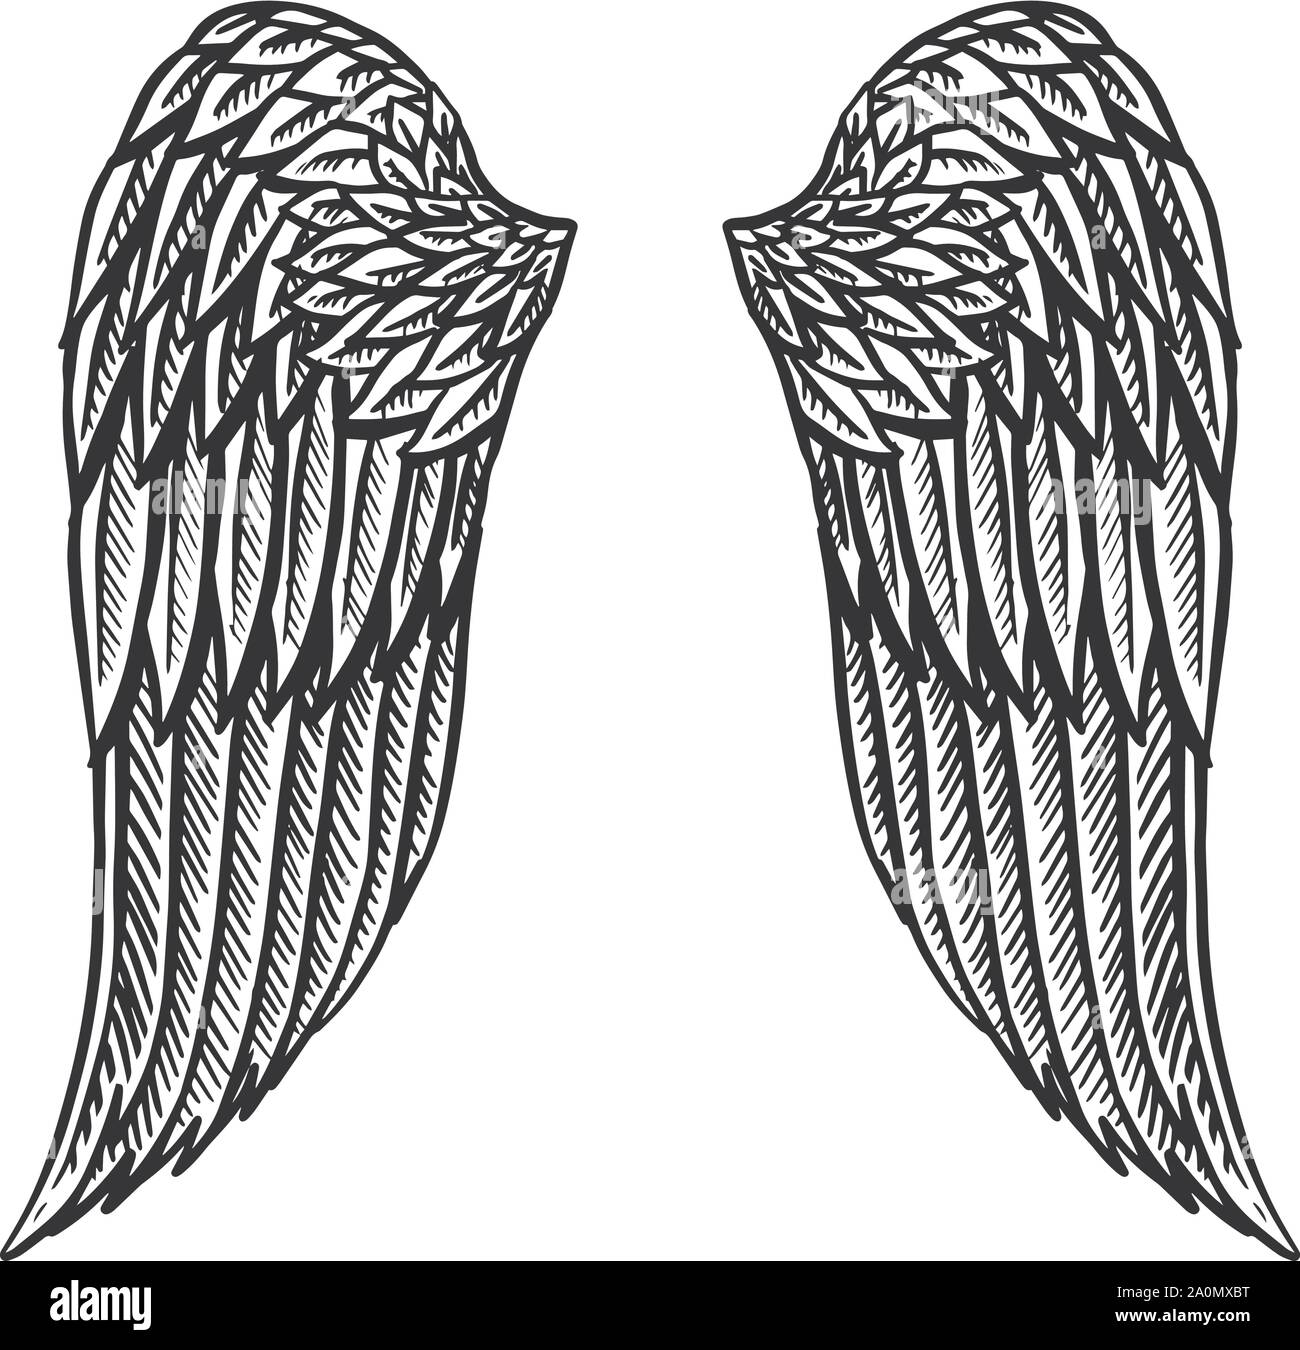 Angel wing in vintage style. Template for tattoo and emblems, t-shirts and logo. Emblem for stickers. Engraved sketch. Vector illustration. Stock Vector